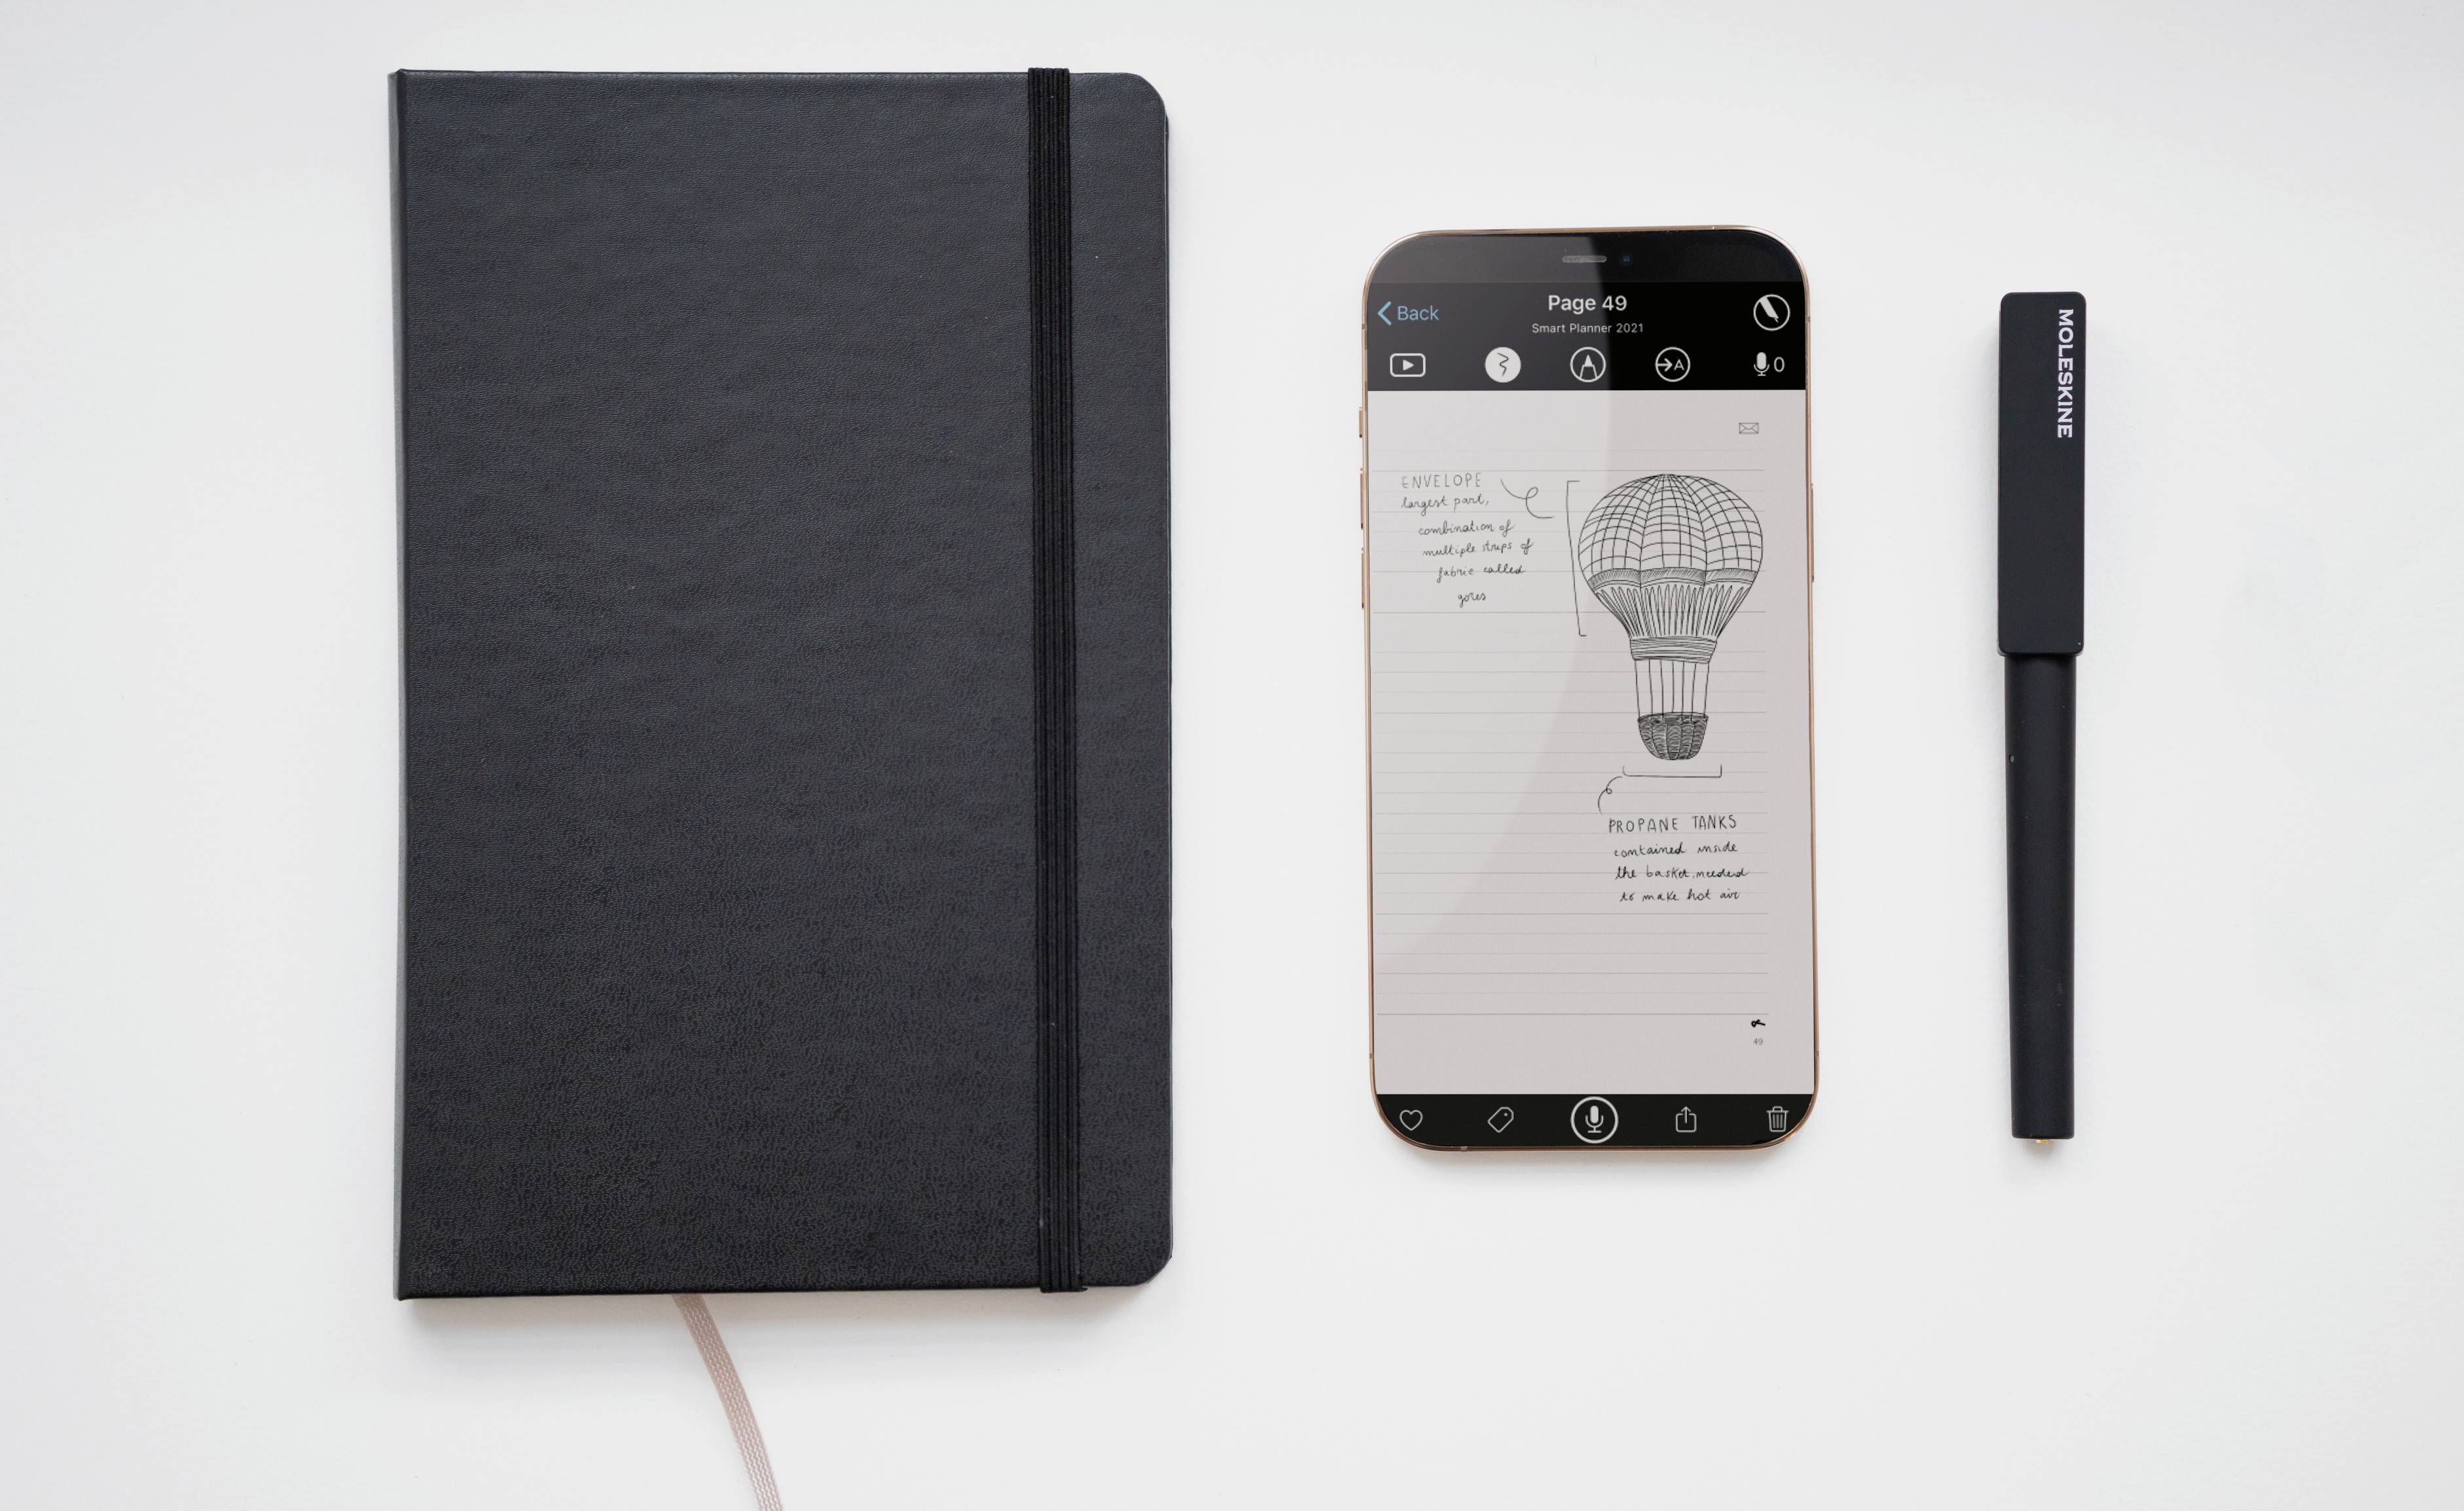 Moleskin Smart Writing Set & How it Connects to Evernote : A Review